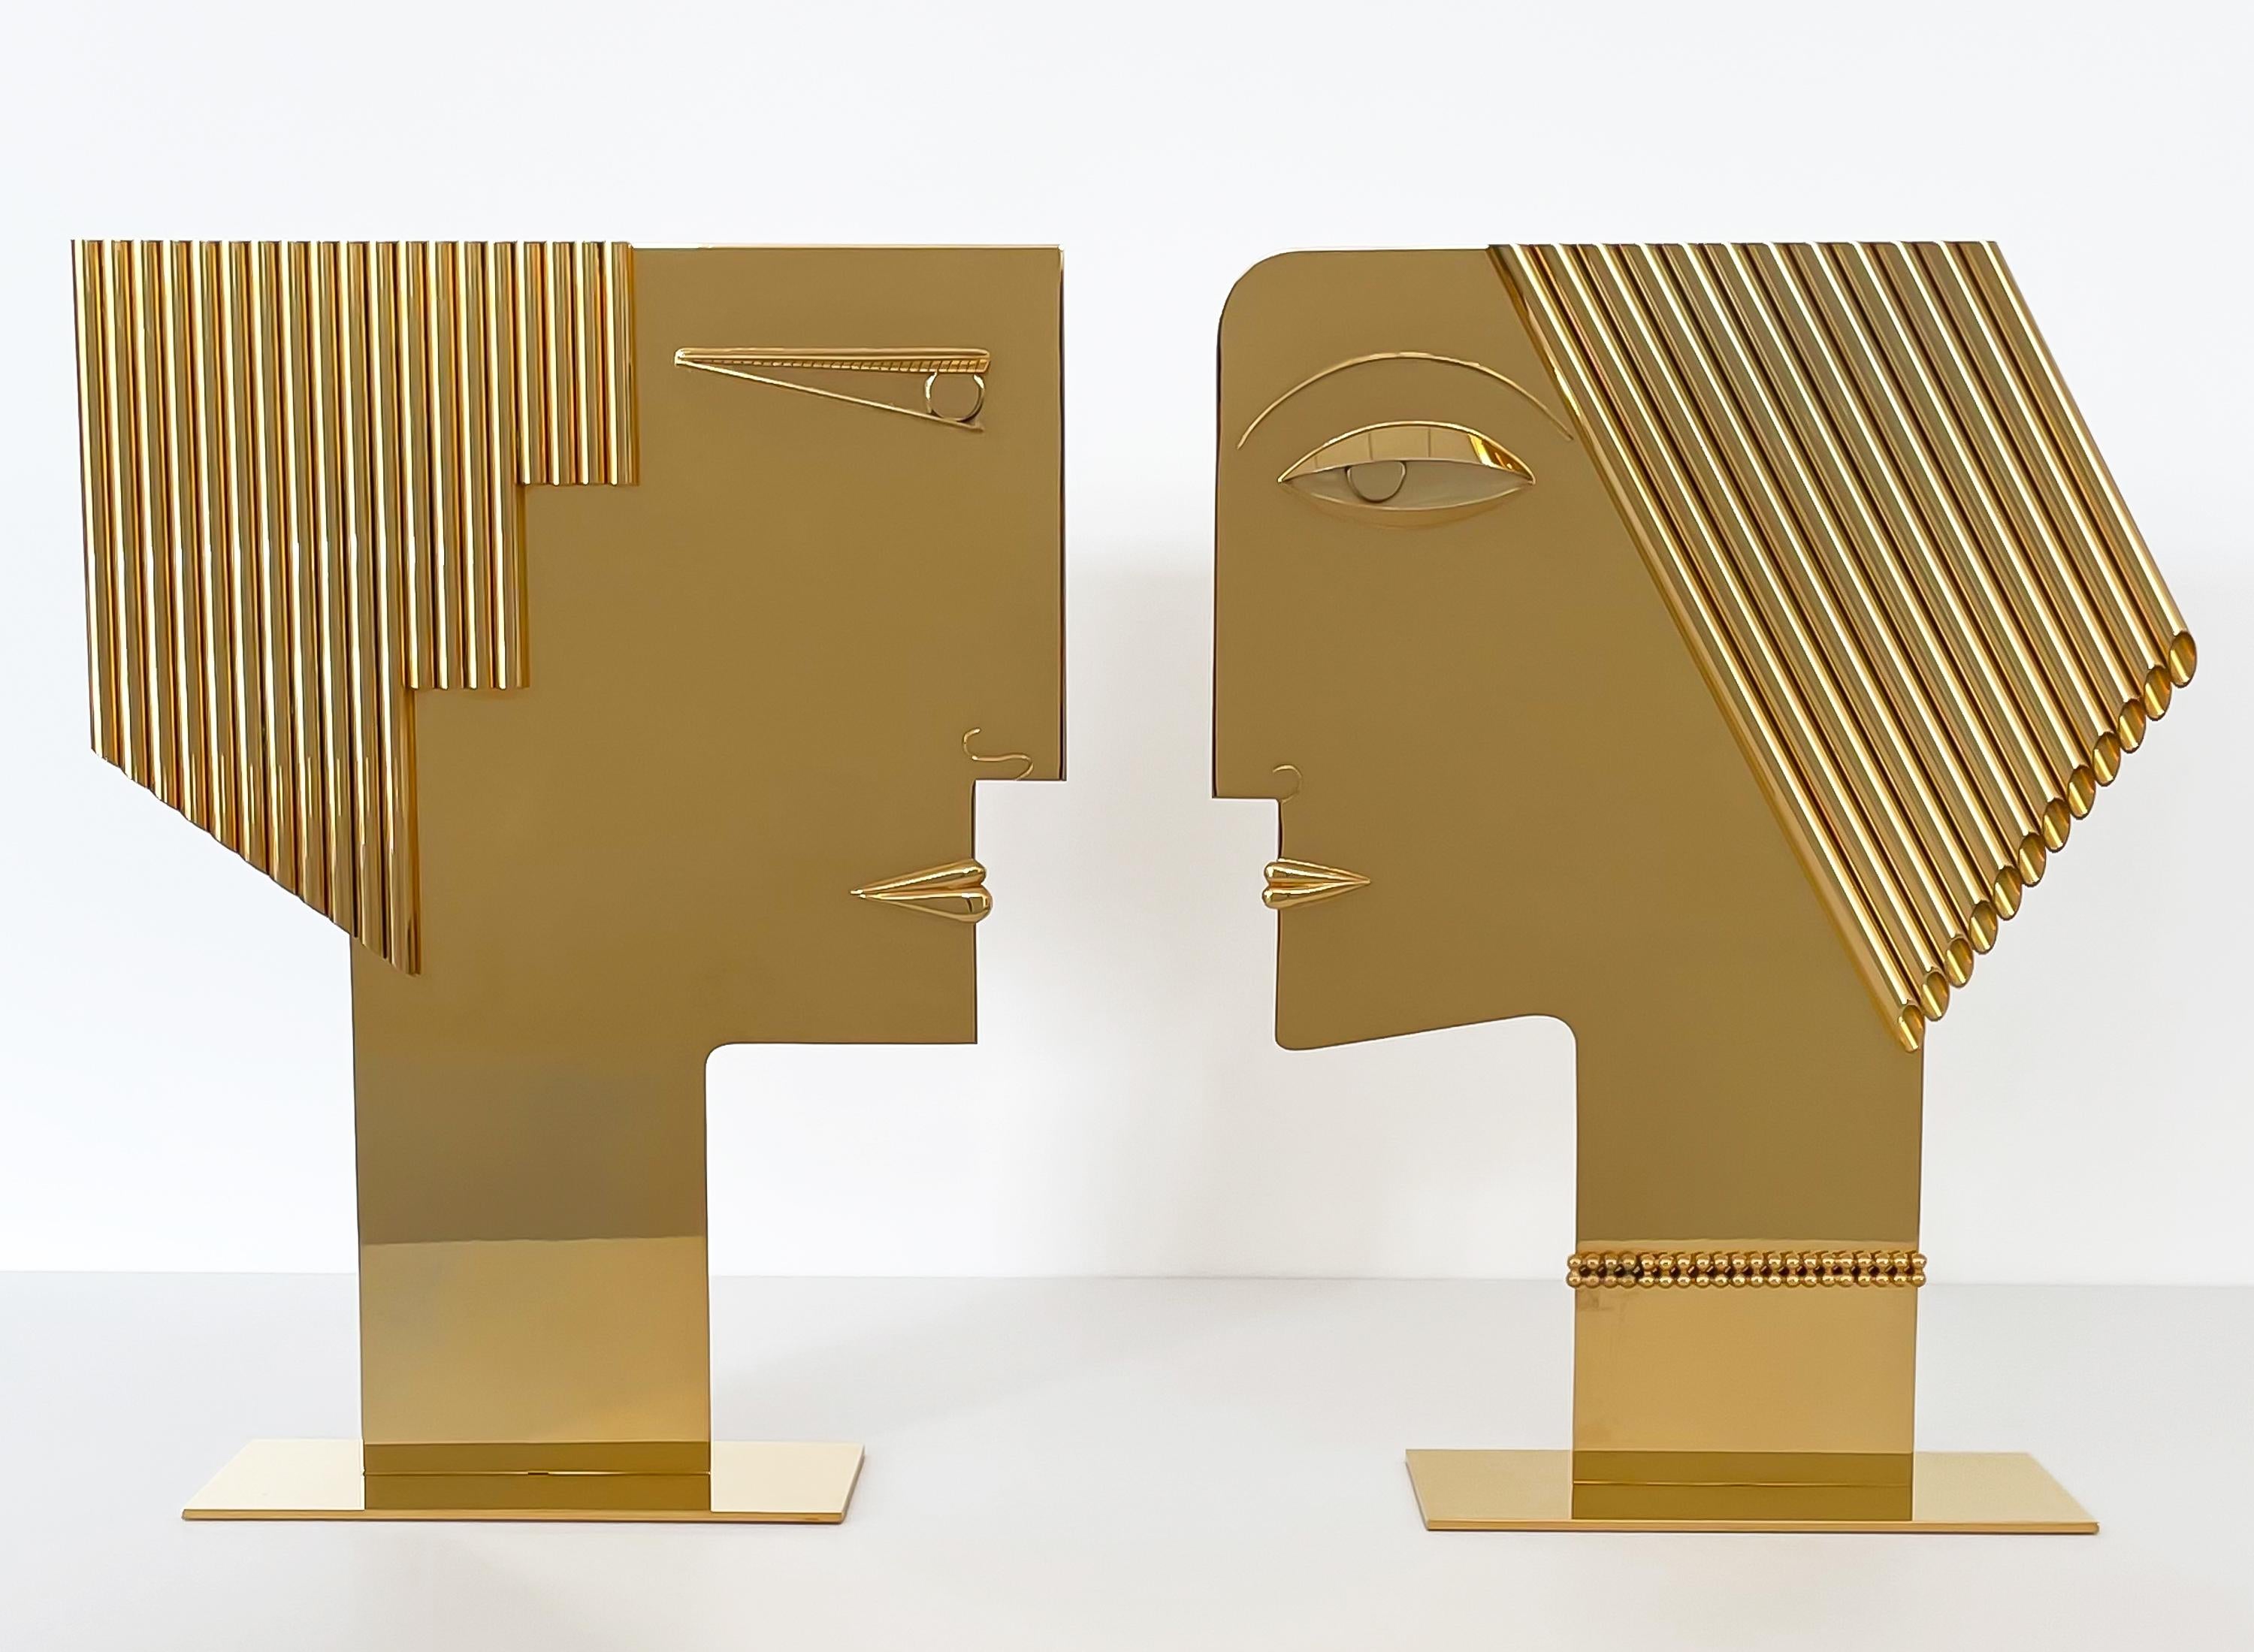 A set of brass man and woman bust sculptures by Franz Hagenauer, circa 1960s for Hagenauer Werkstätte. Untitled and often referred to as 